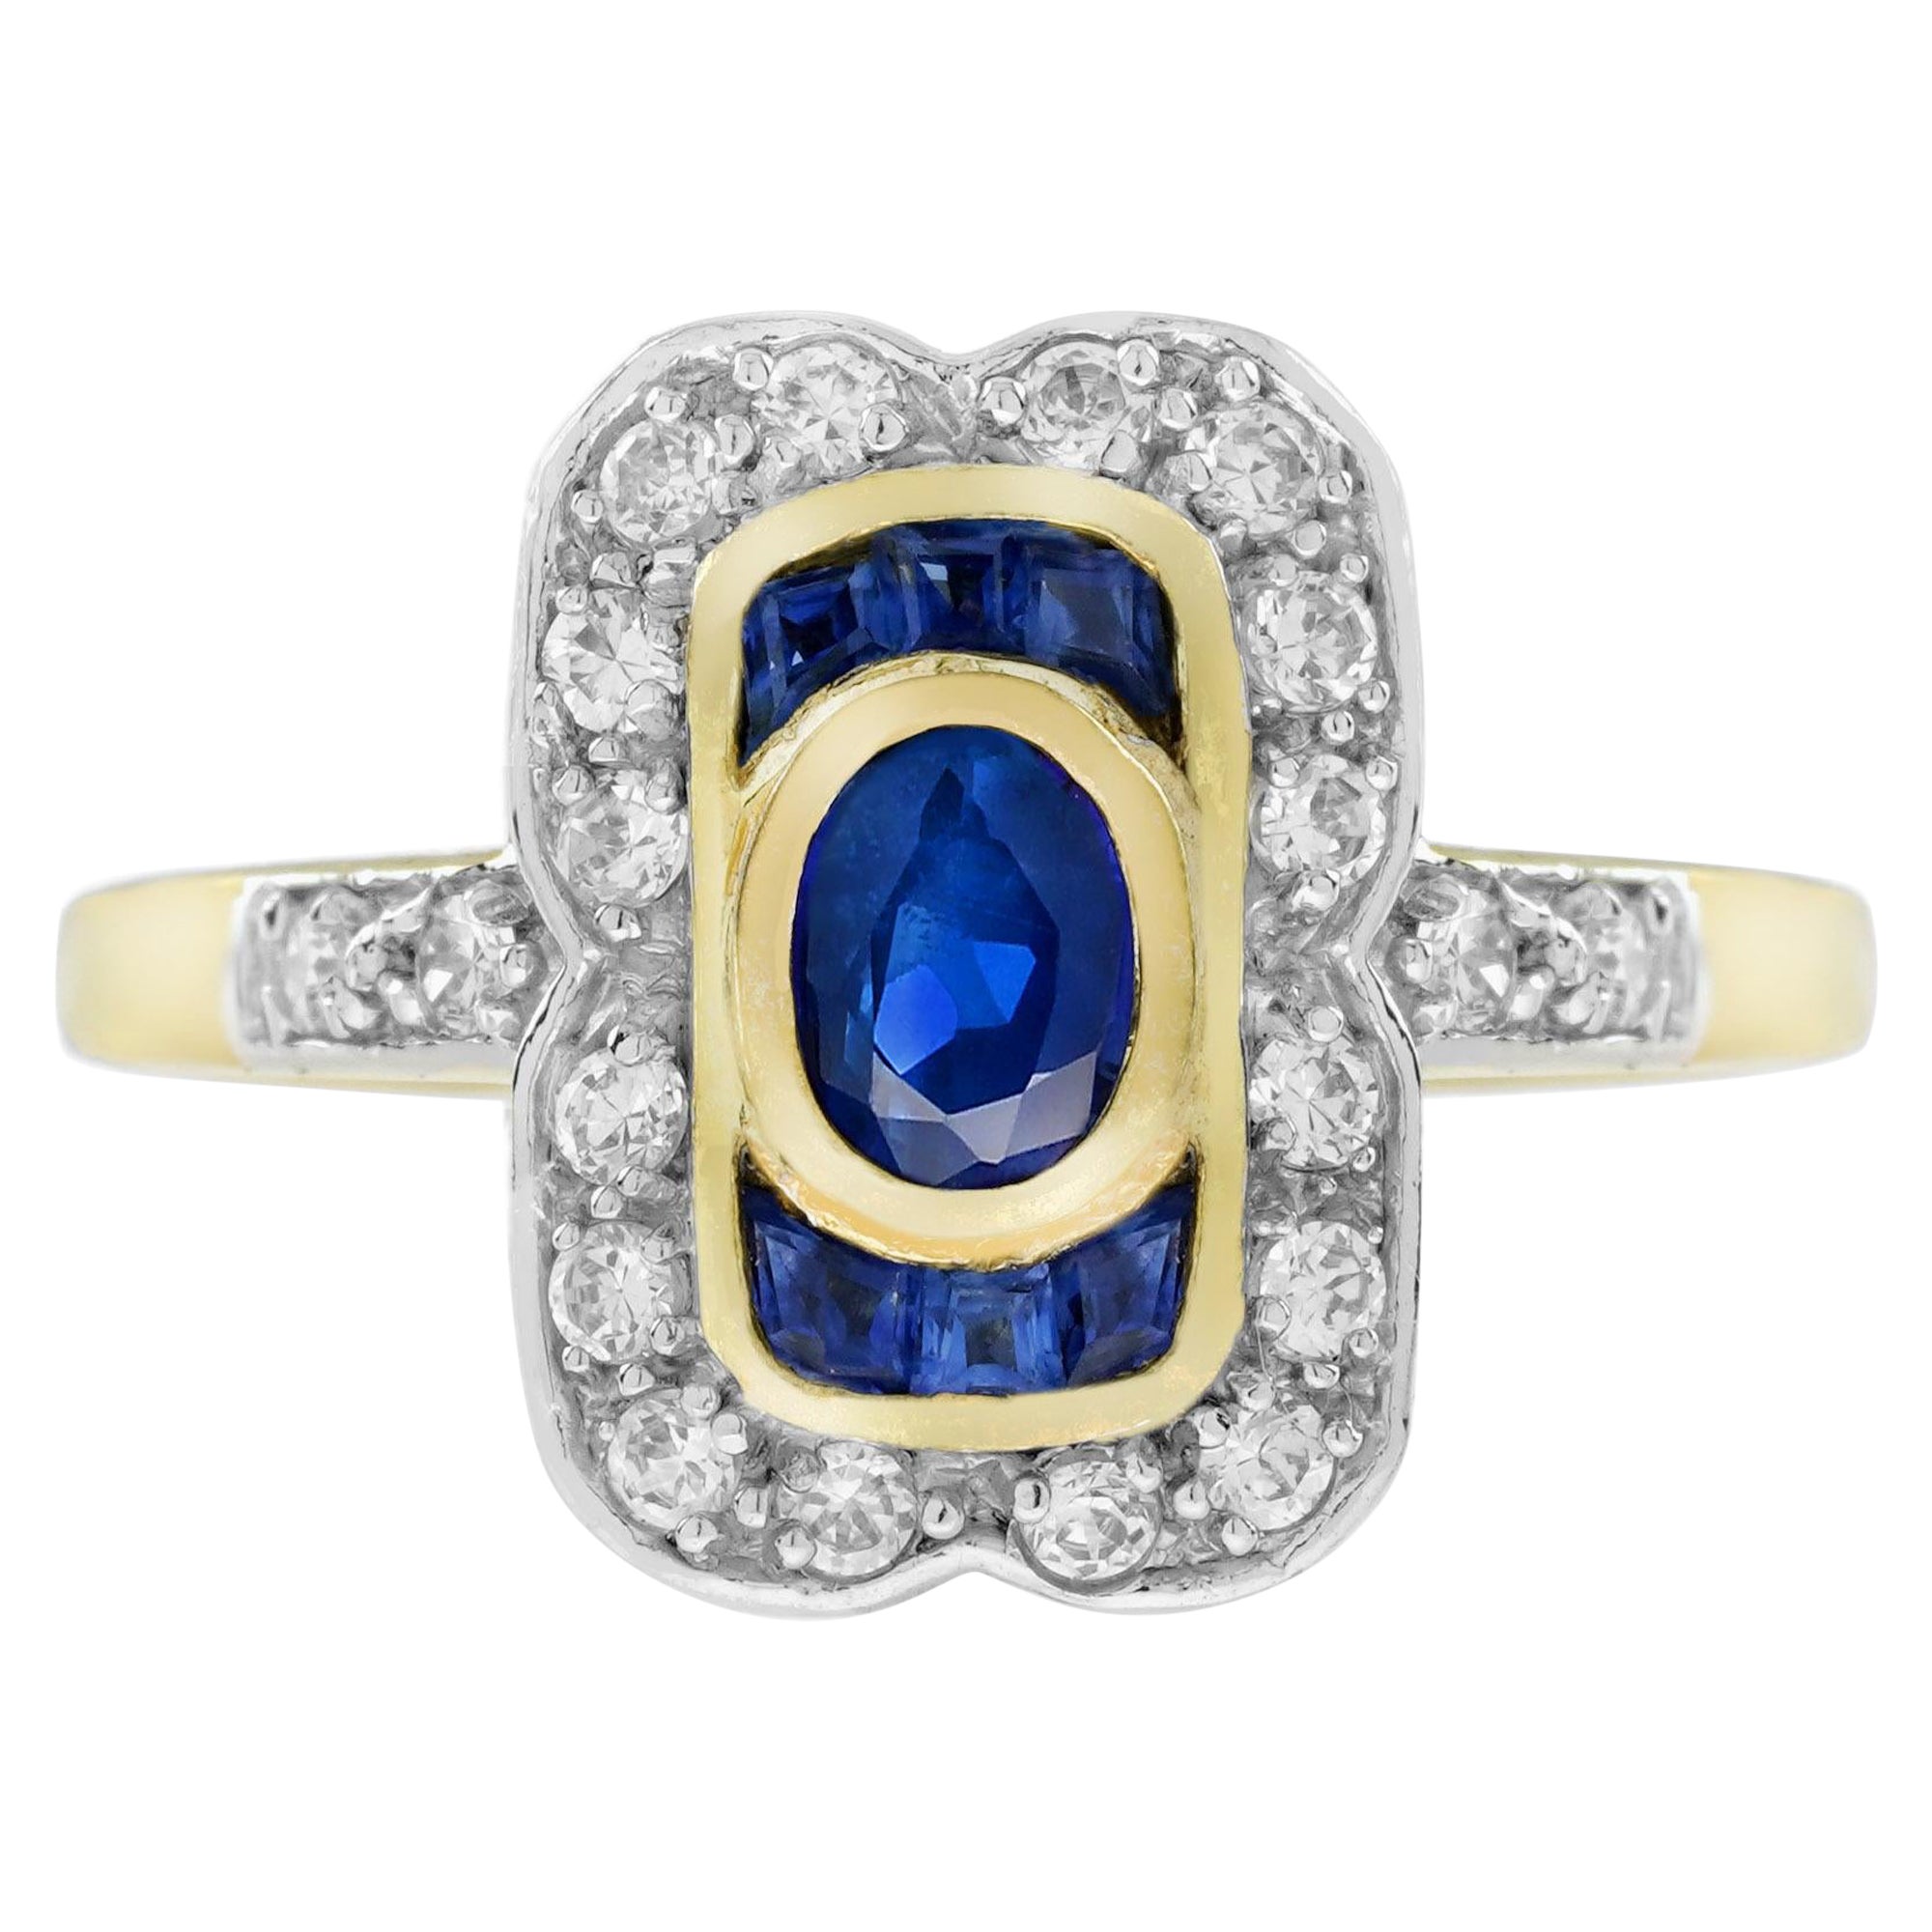 For Sale:  Oval Blue Sapphire and Diamond Art Deco Style Engagement Ring in 14K Gold